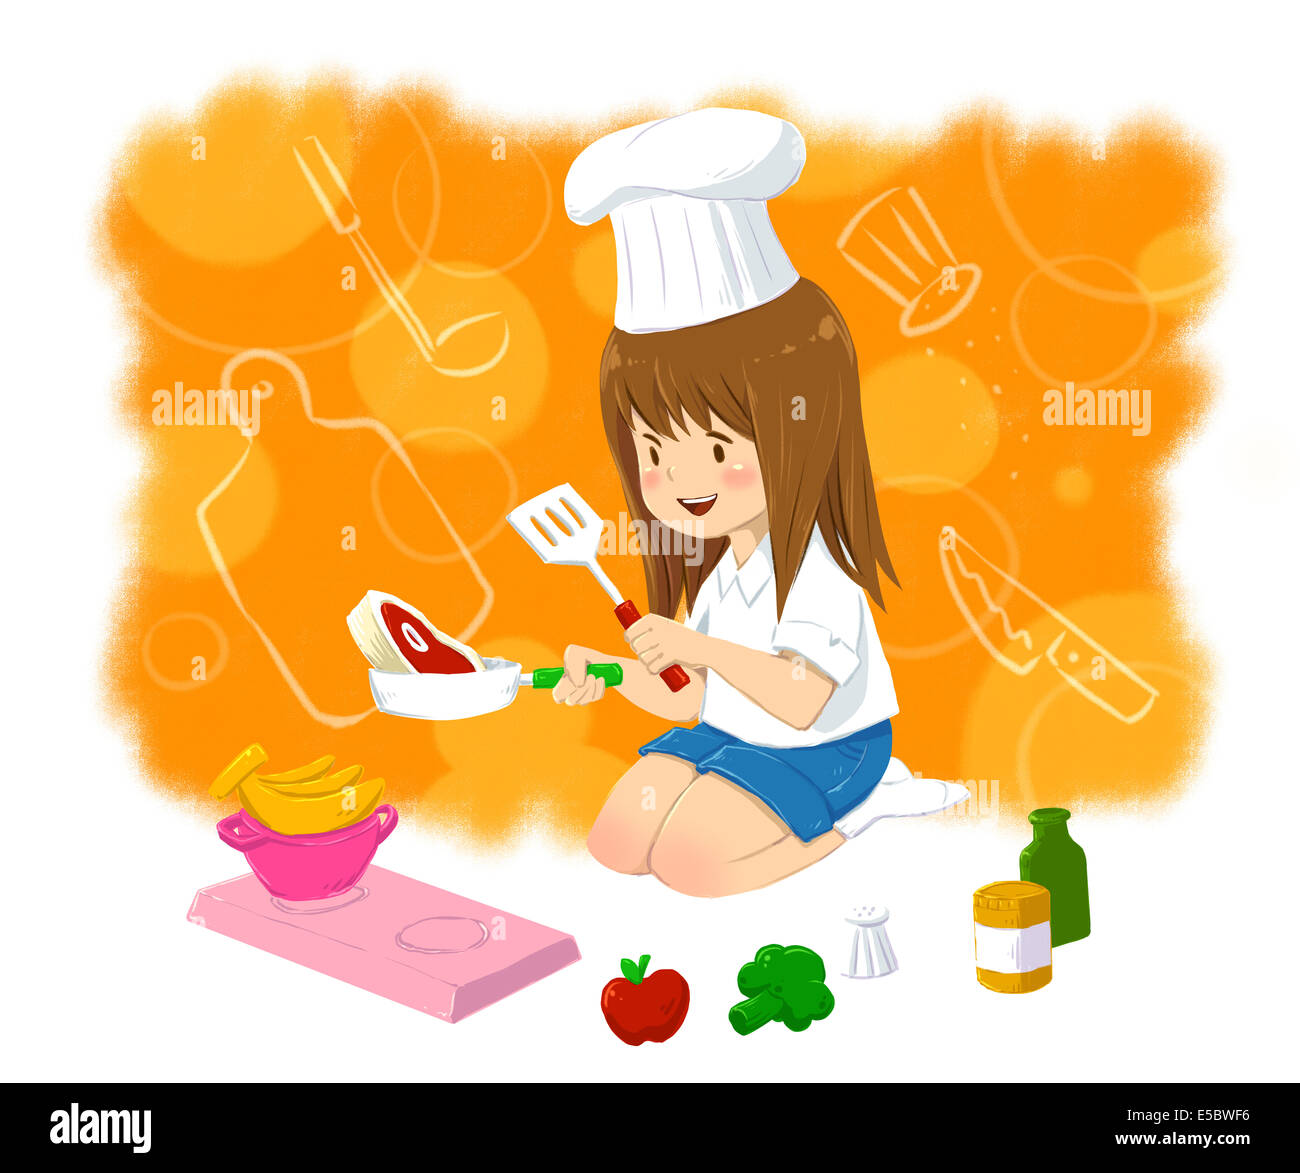 Illustrative image of girl in chef's hat cooking food representing aspiration Stock Photo